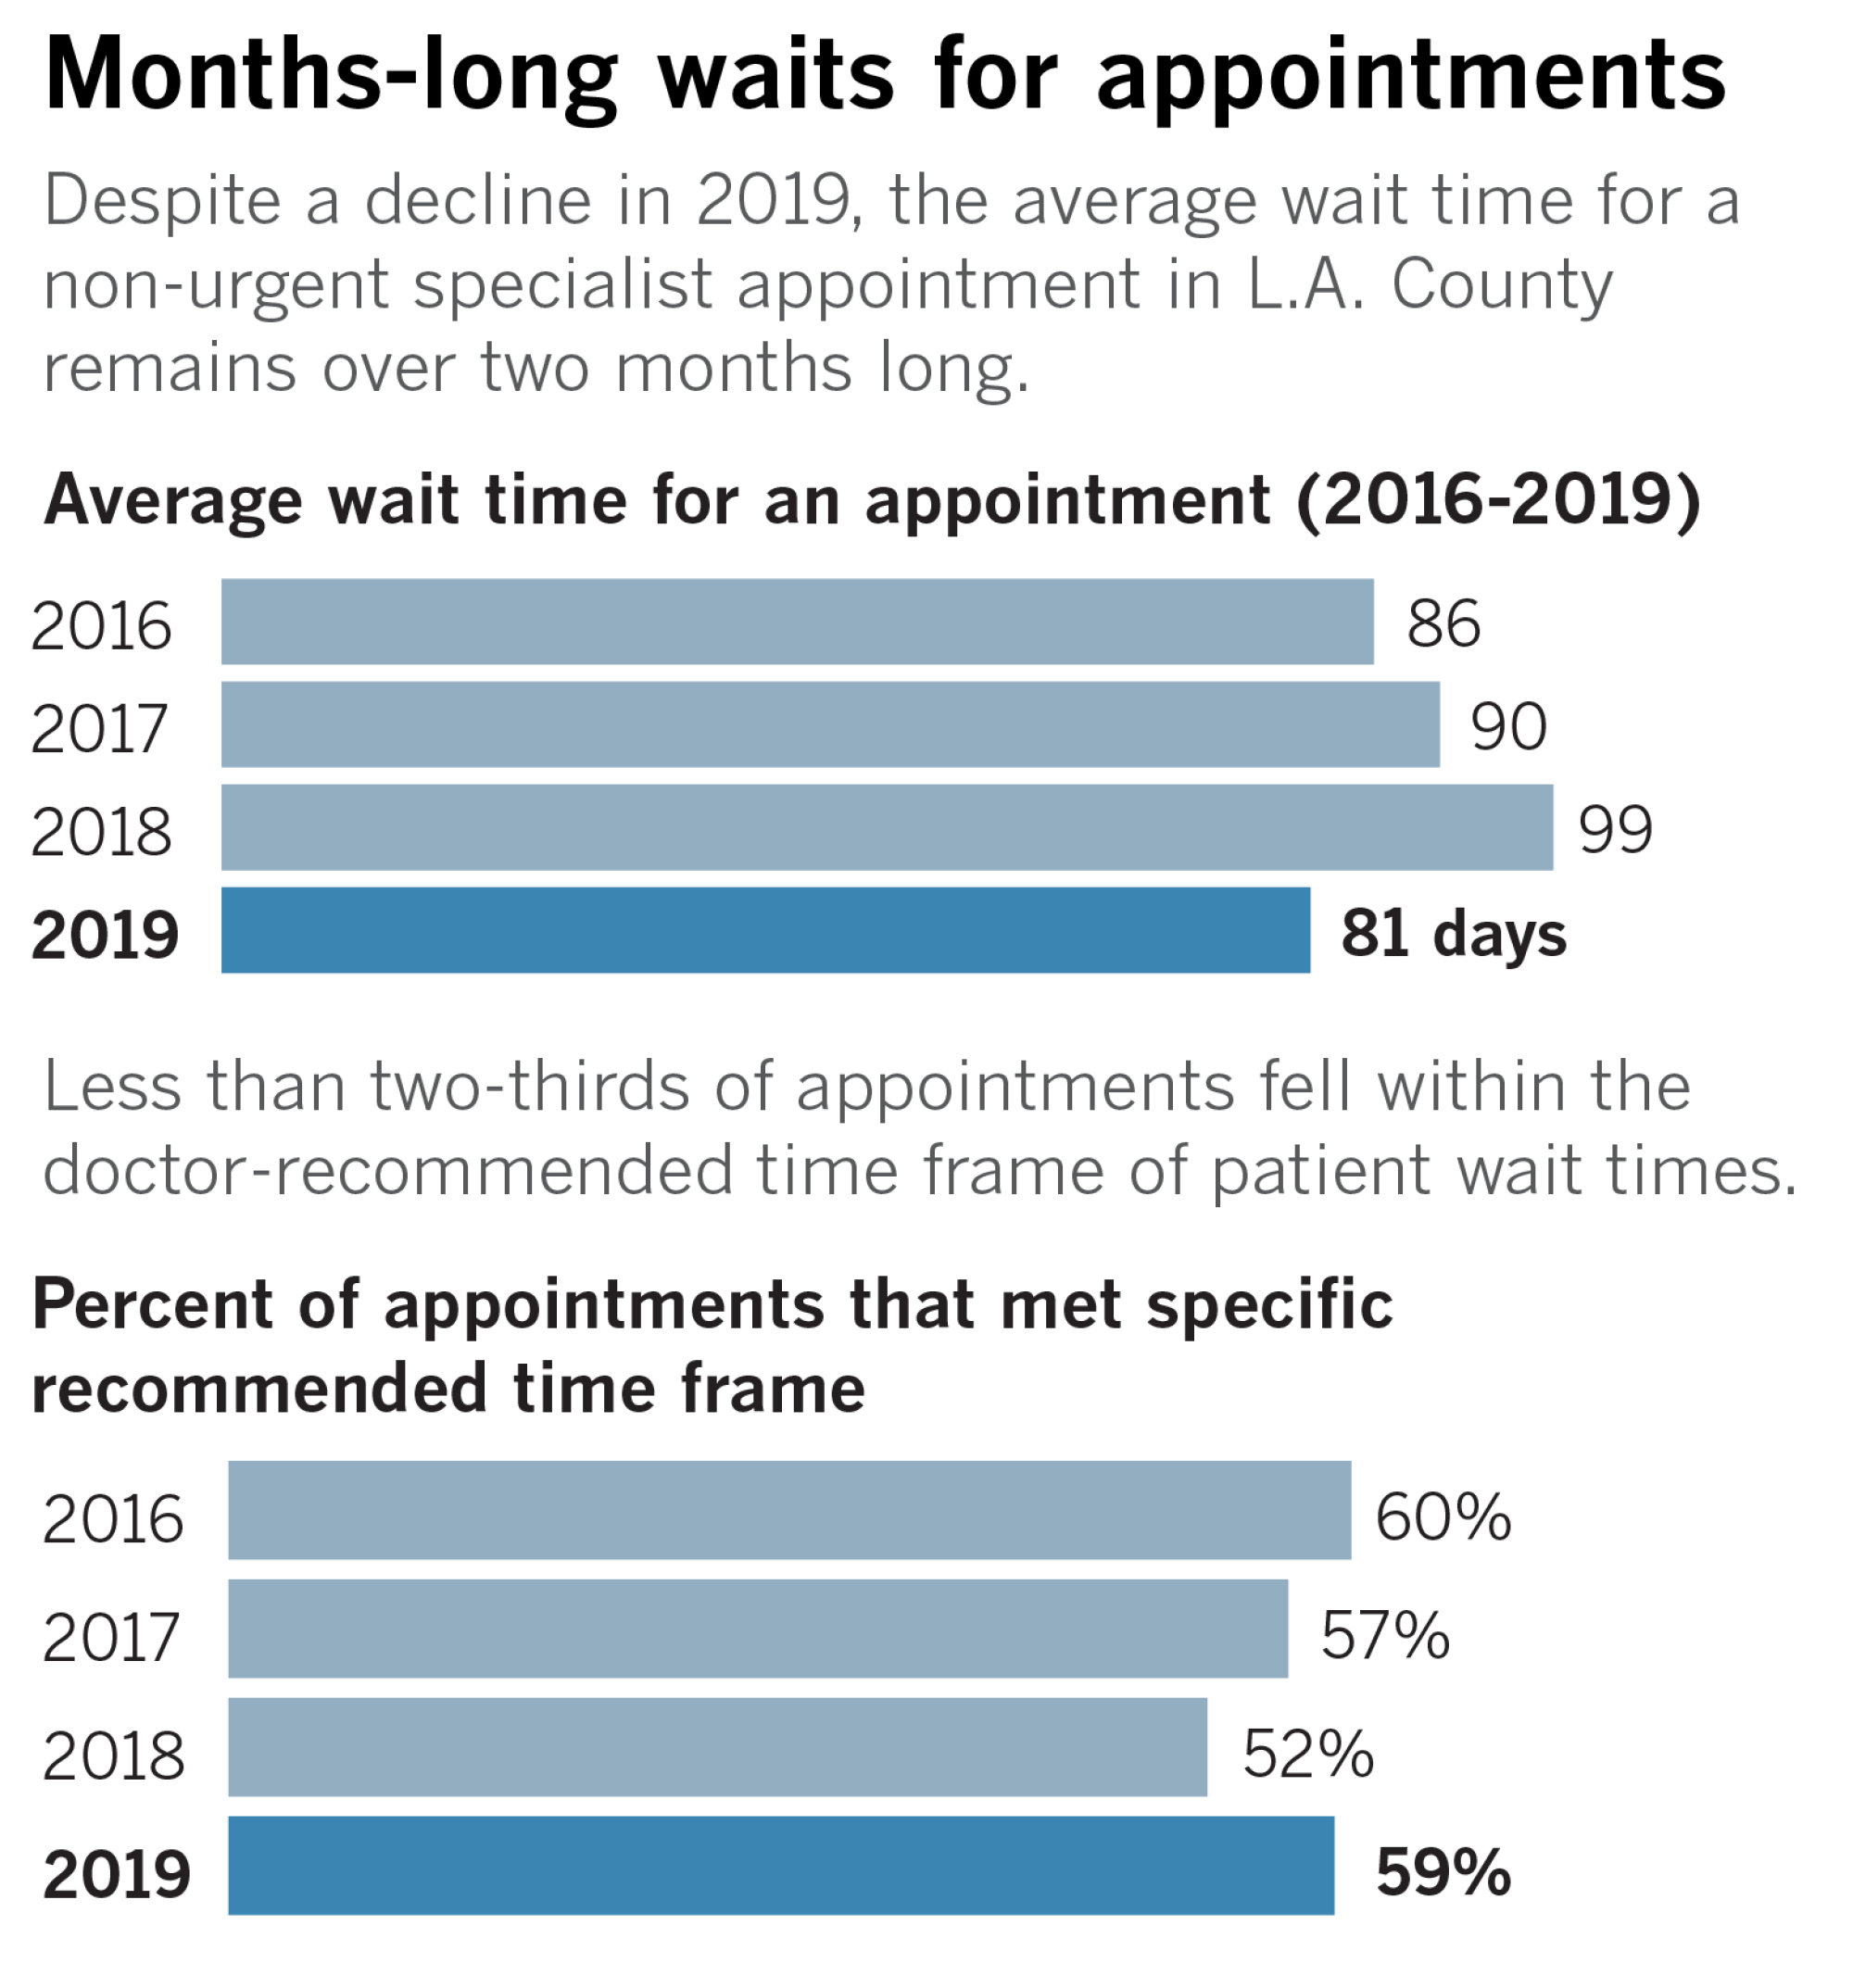 Chart showing wait times over two months long for appointments in L.A. County.